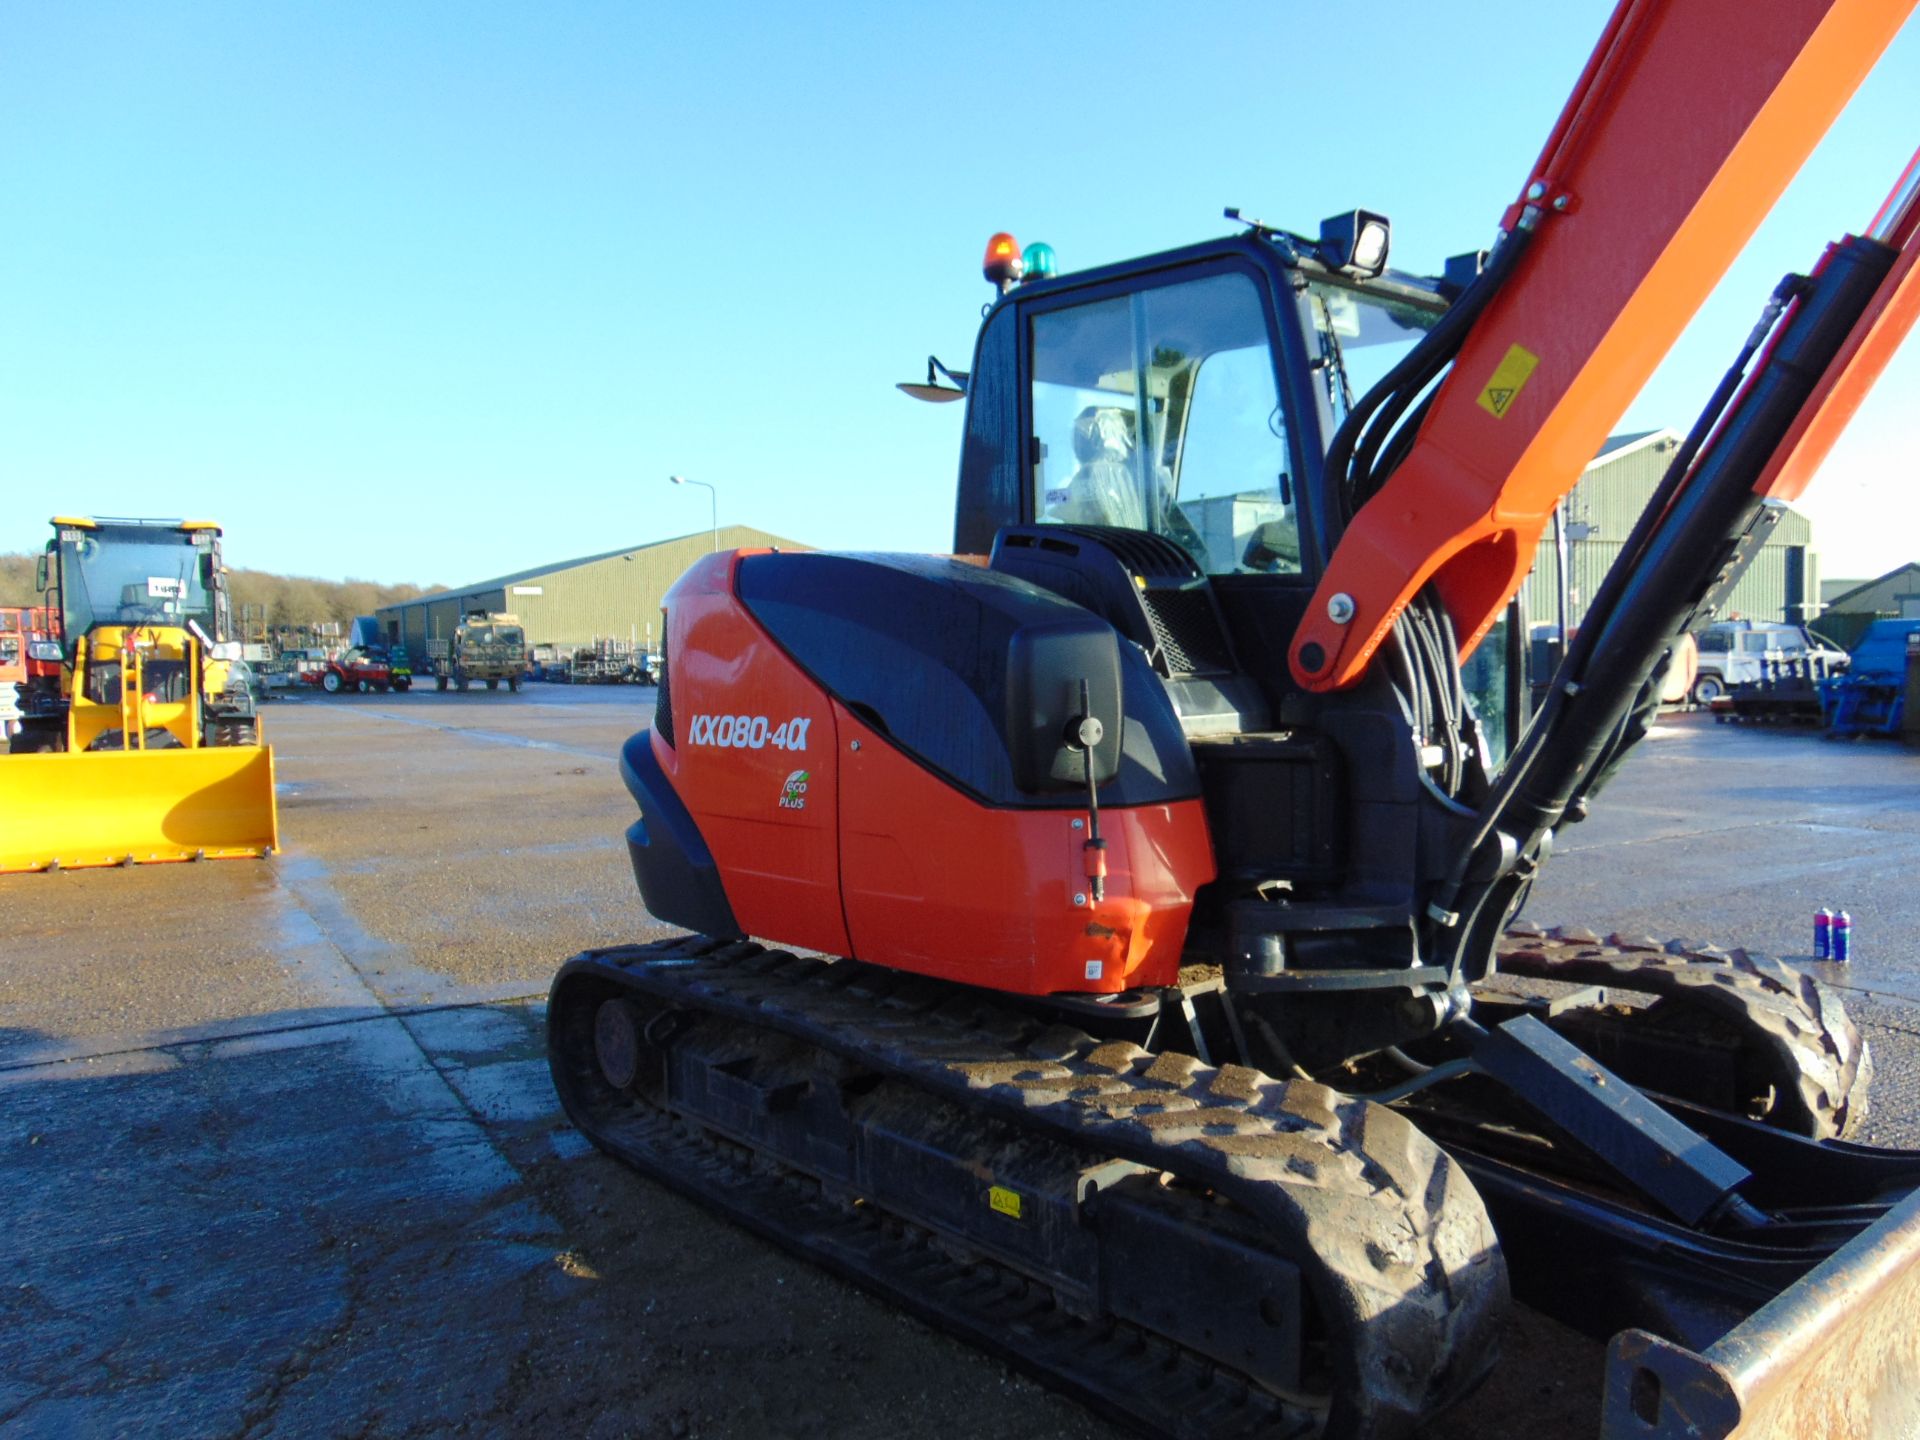 2017 KUBOTA KX 080-4A Excavator 1212 Hrs Only Very High Specification with 3 Buckets Sno 42470 - Bild 6 aus 25